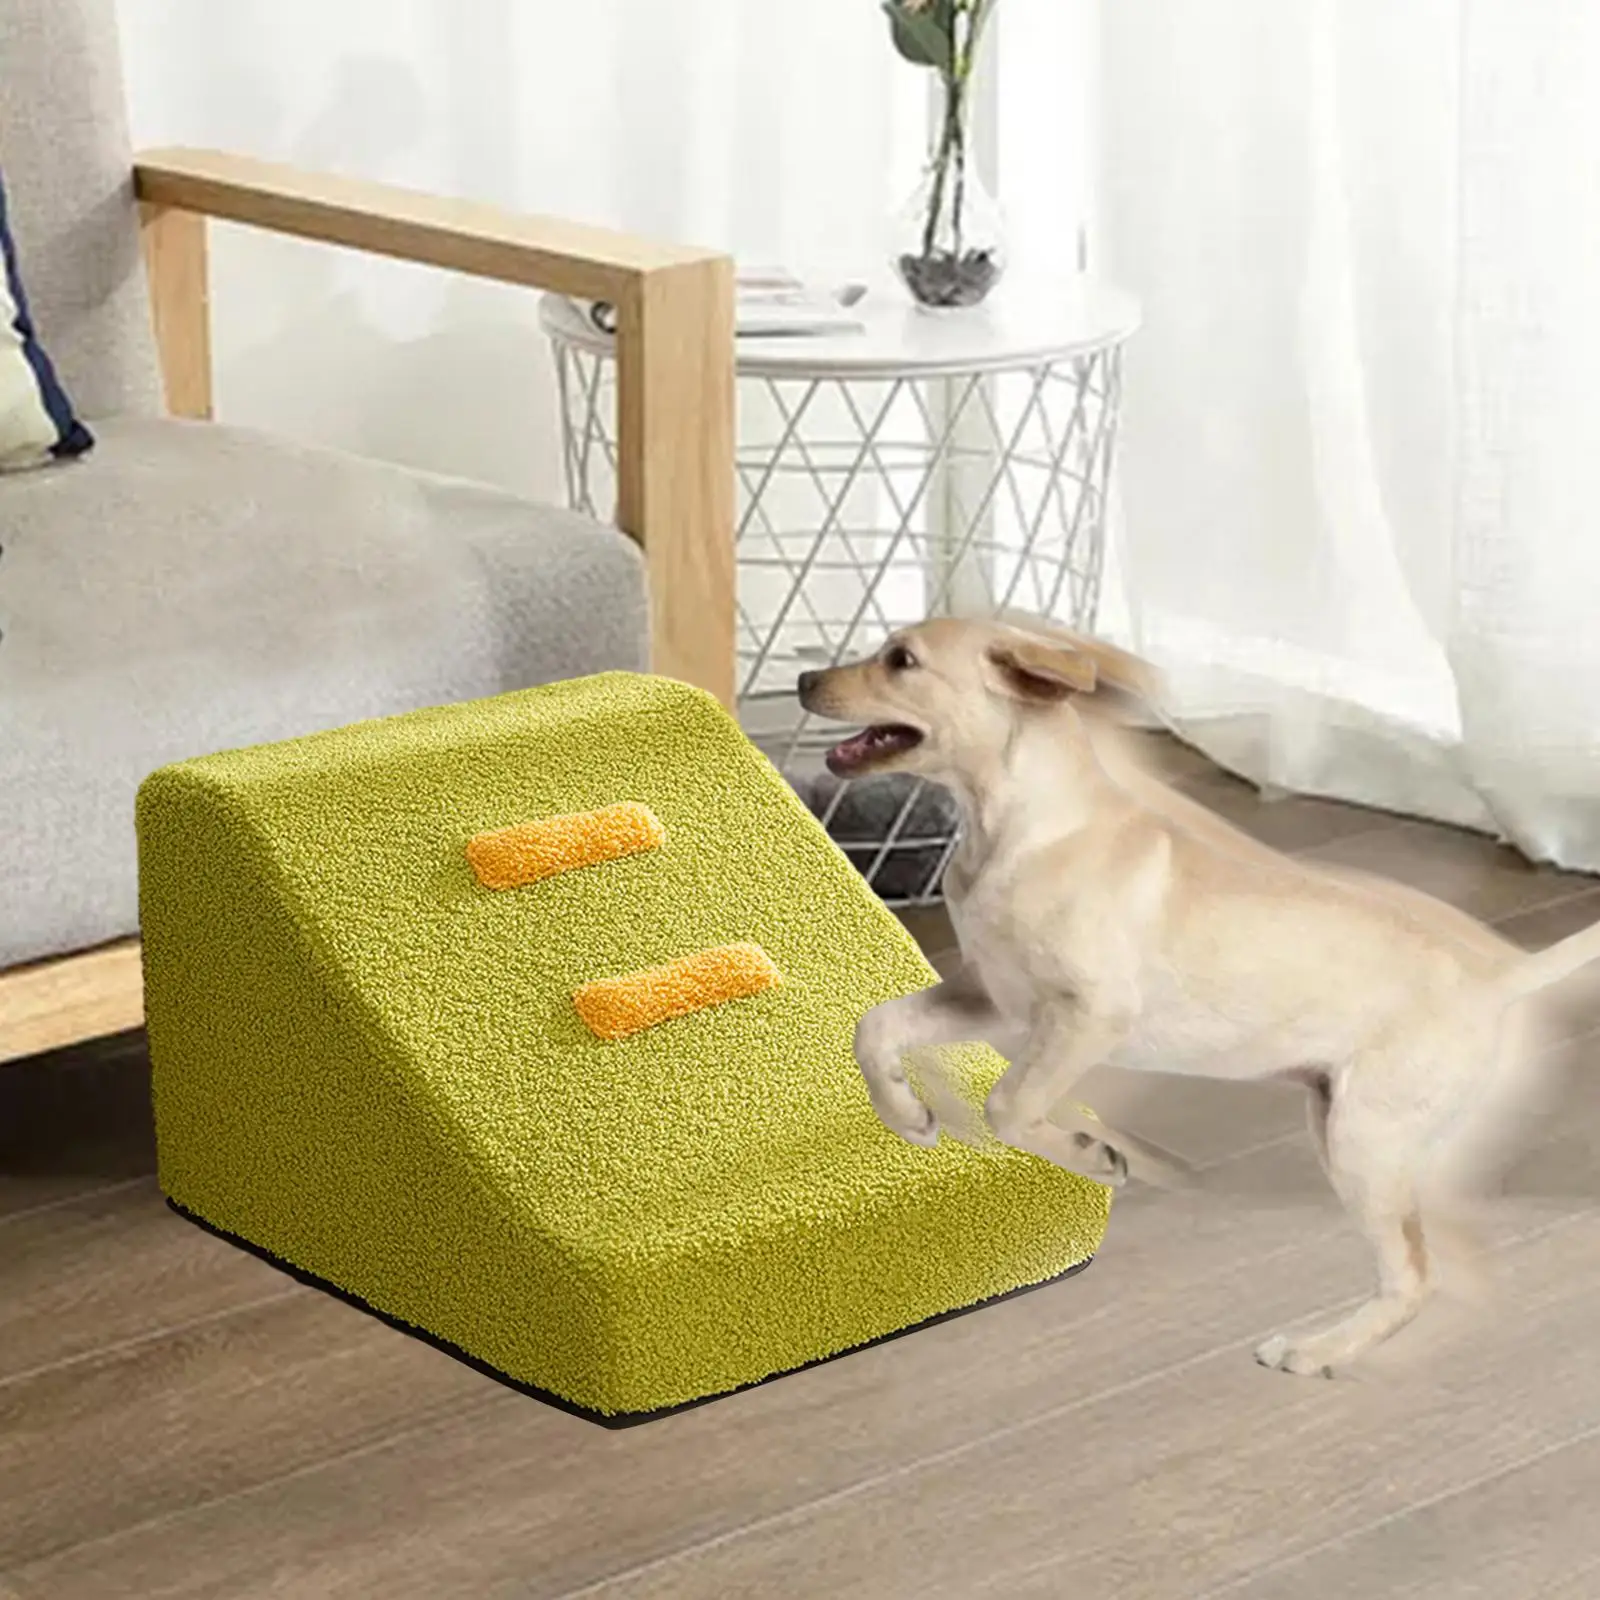 Dog Stairs Ramp Indoor Outdoor Use Sturdy Comfortable Machine Washable Cover Anti Slip High Density Sponge Dog Climbing Ladder